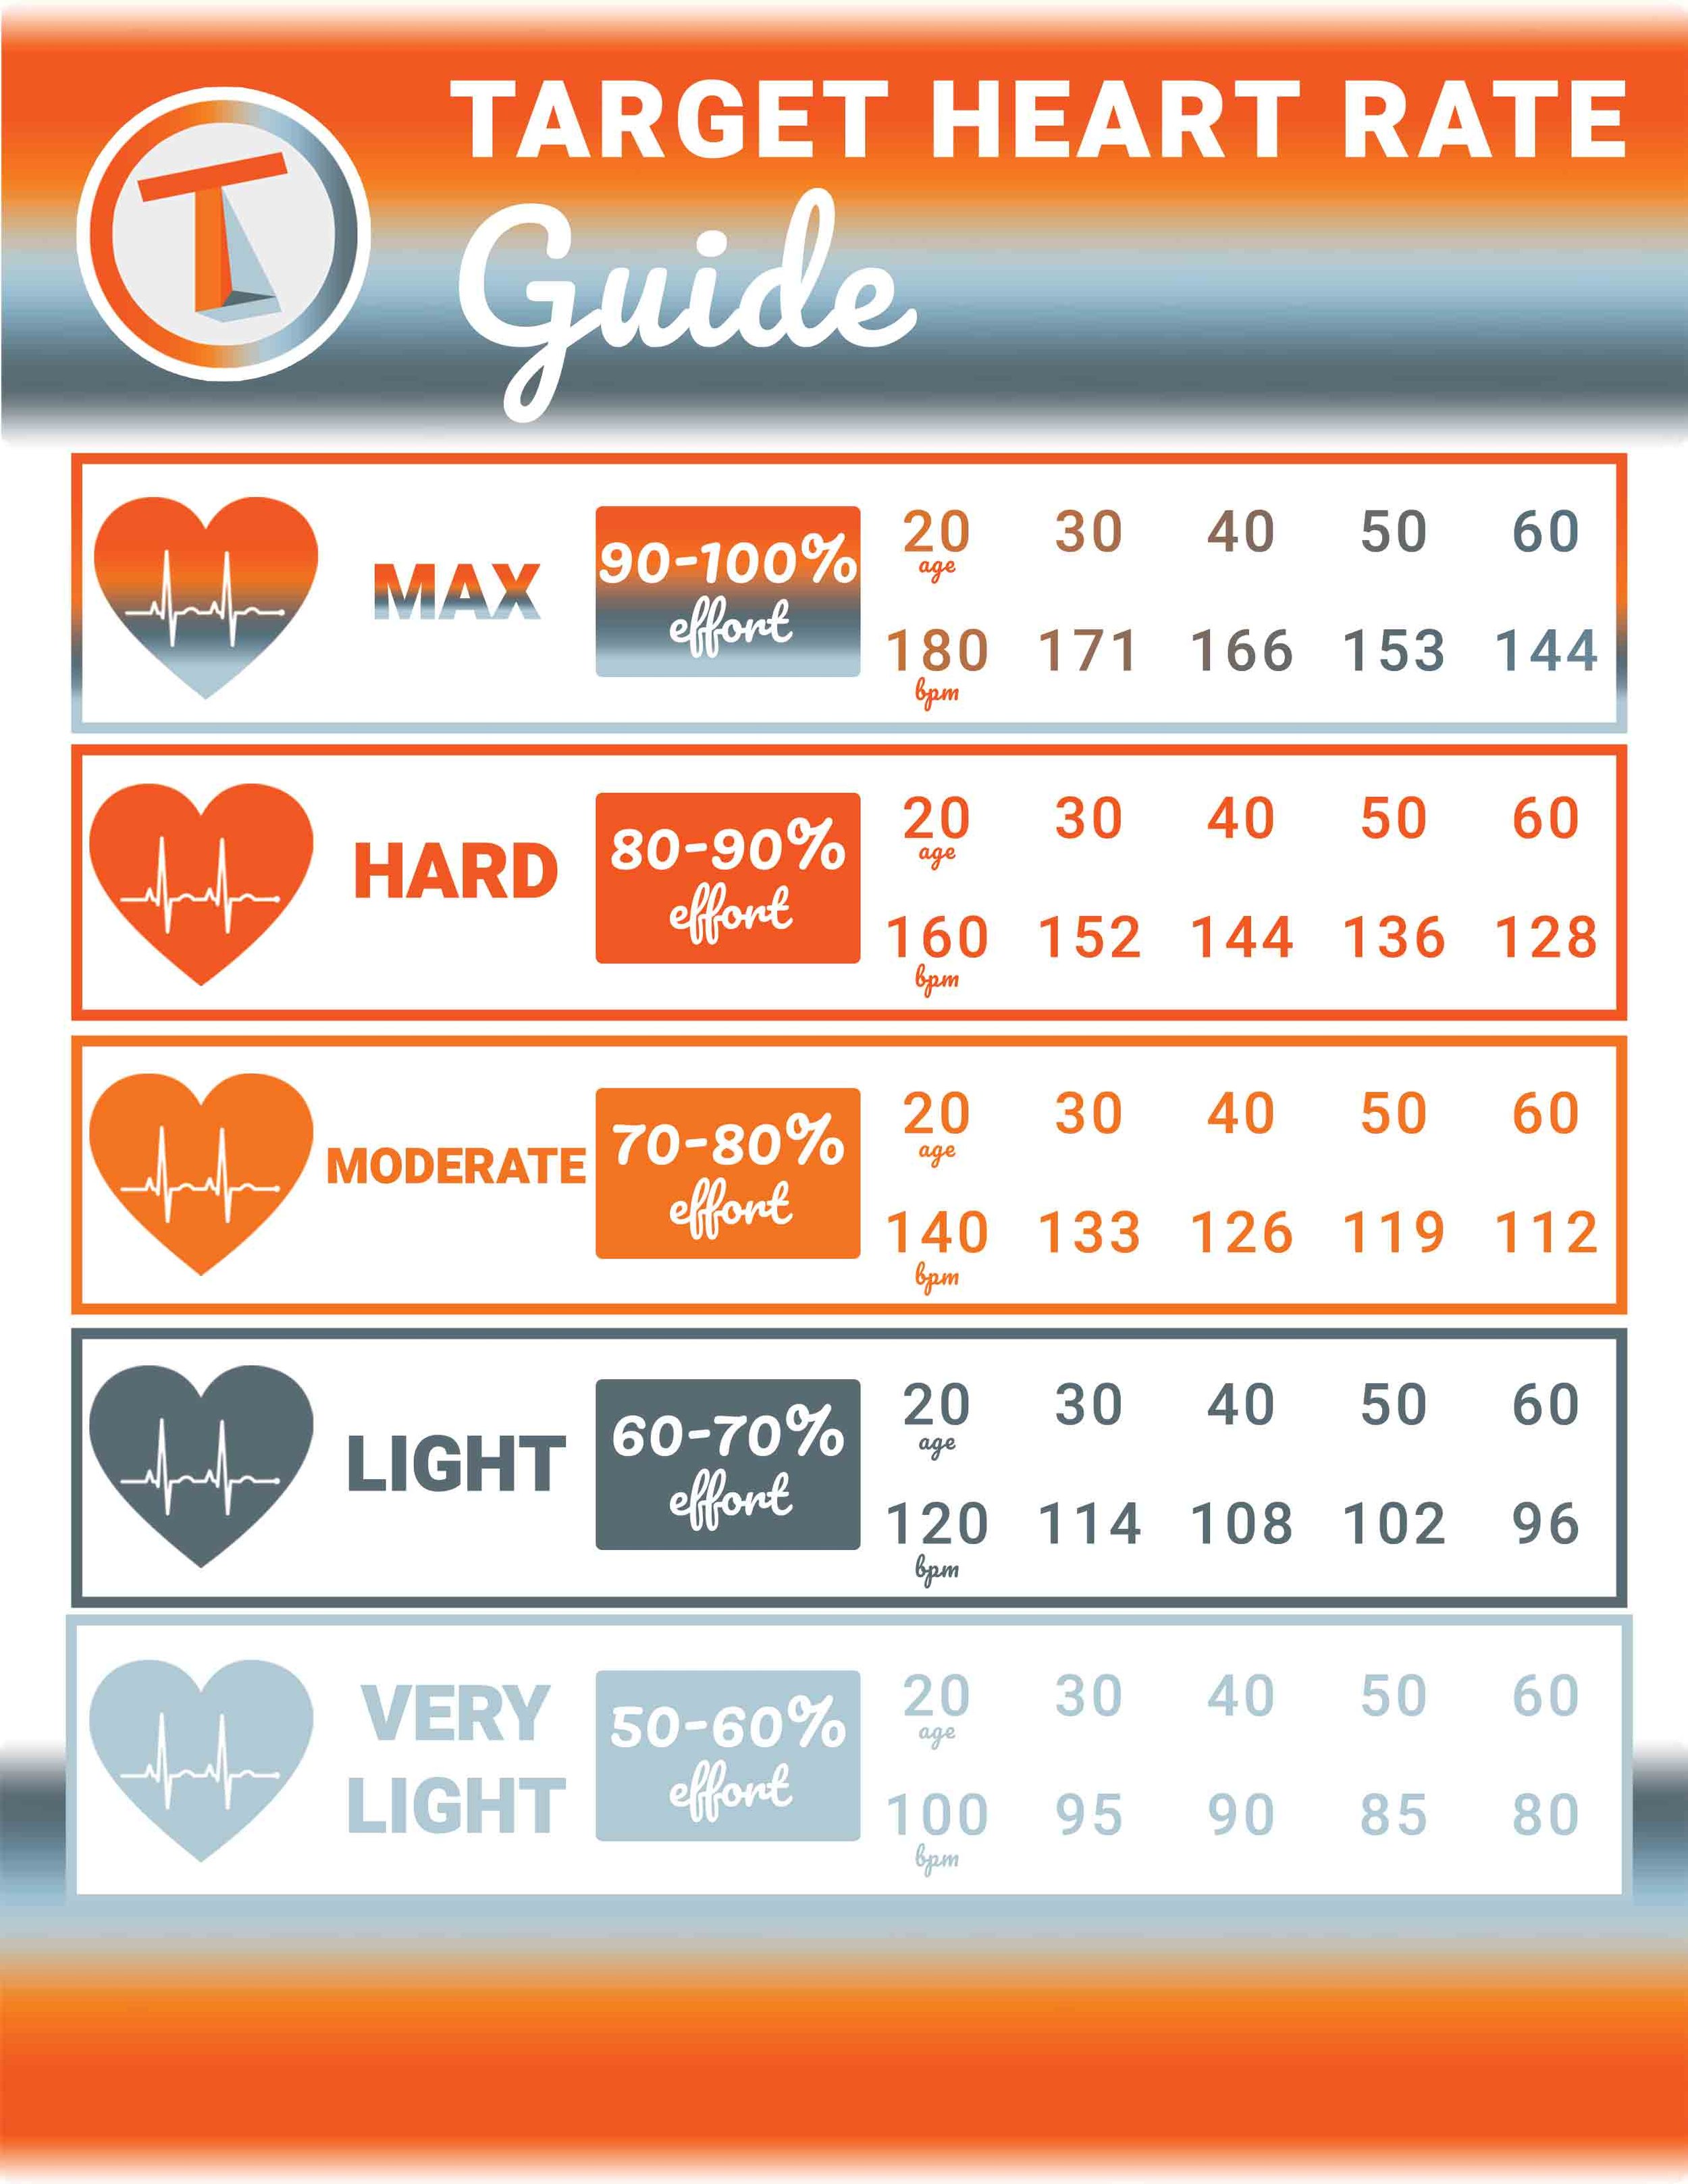 Target Heart Rate Guide — Tilton's Therapy